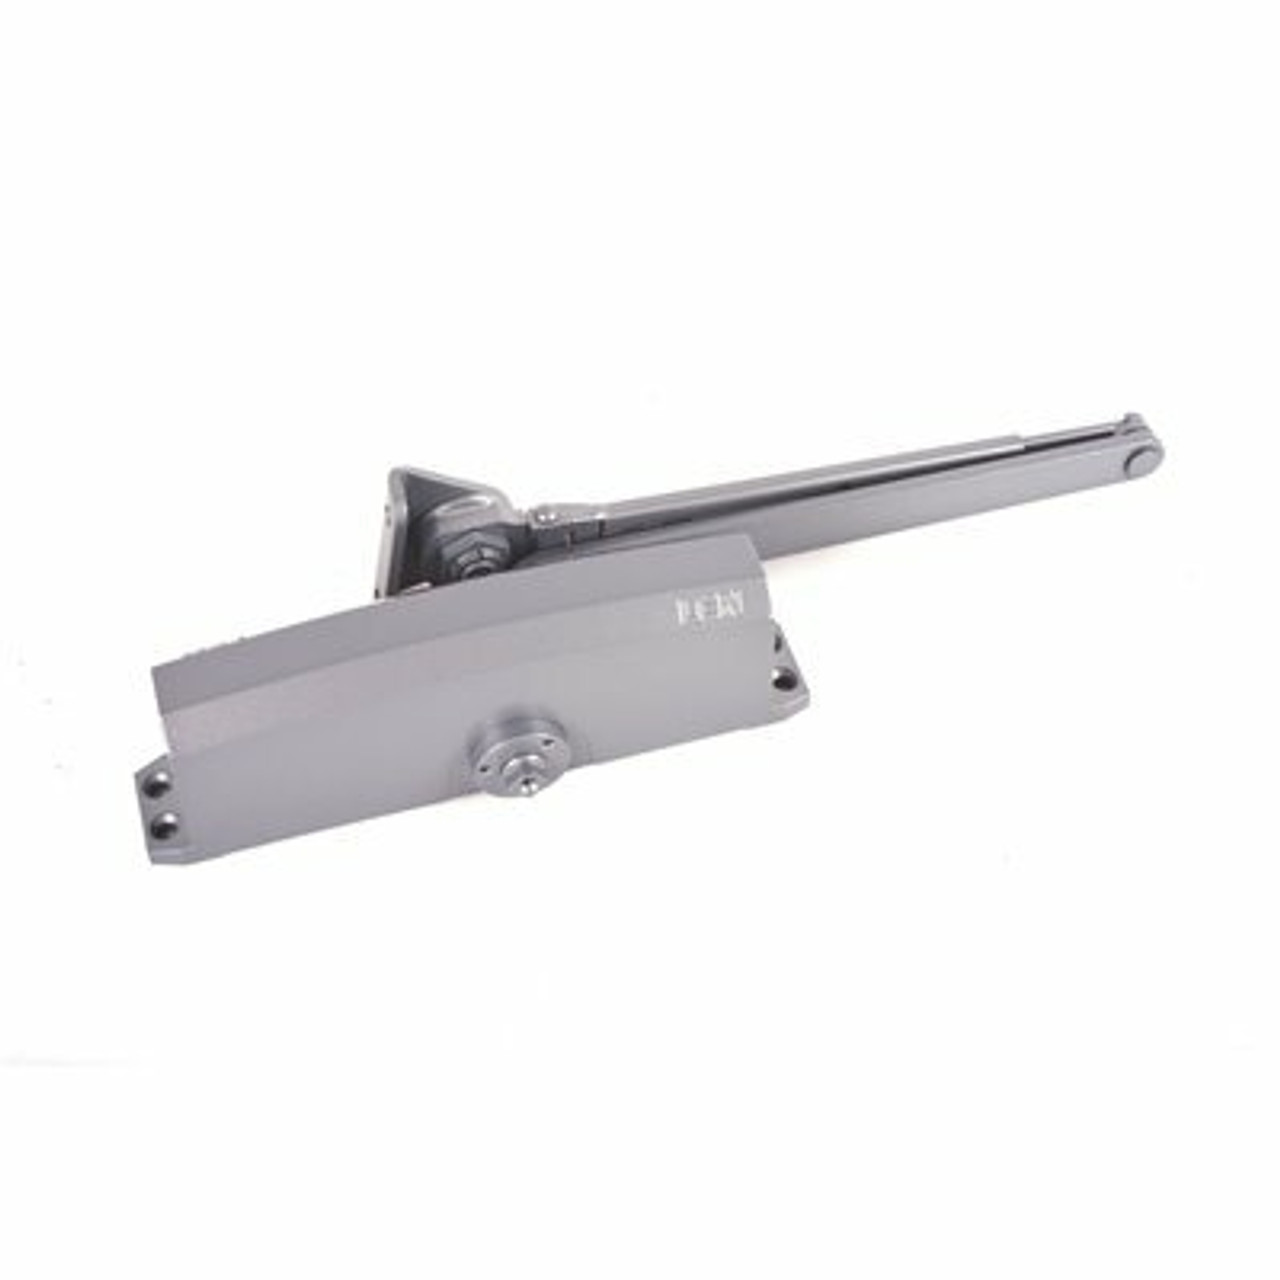 Lcn Sized 1-5 Surface Door Closer, Hold Open Arm With 62Pa Shoe, Aluminum/689 Finish, , (15-Year Warranty)